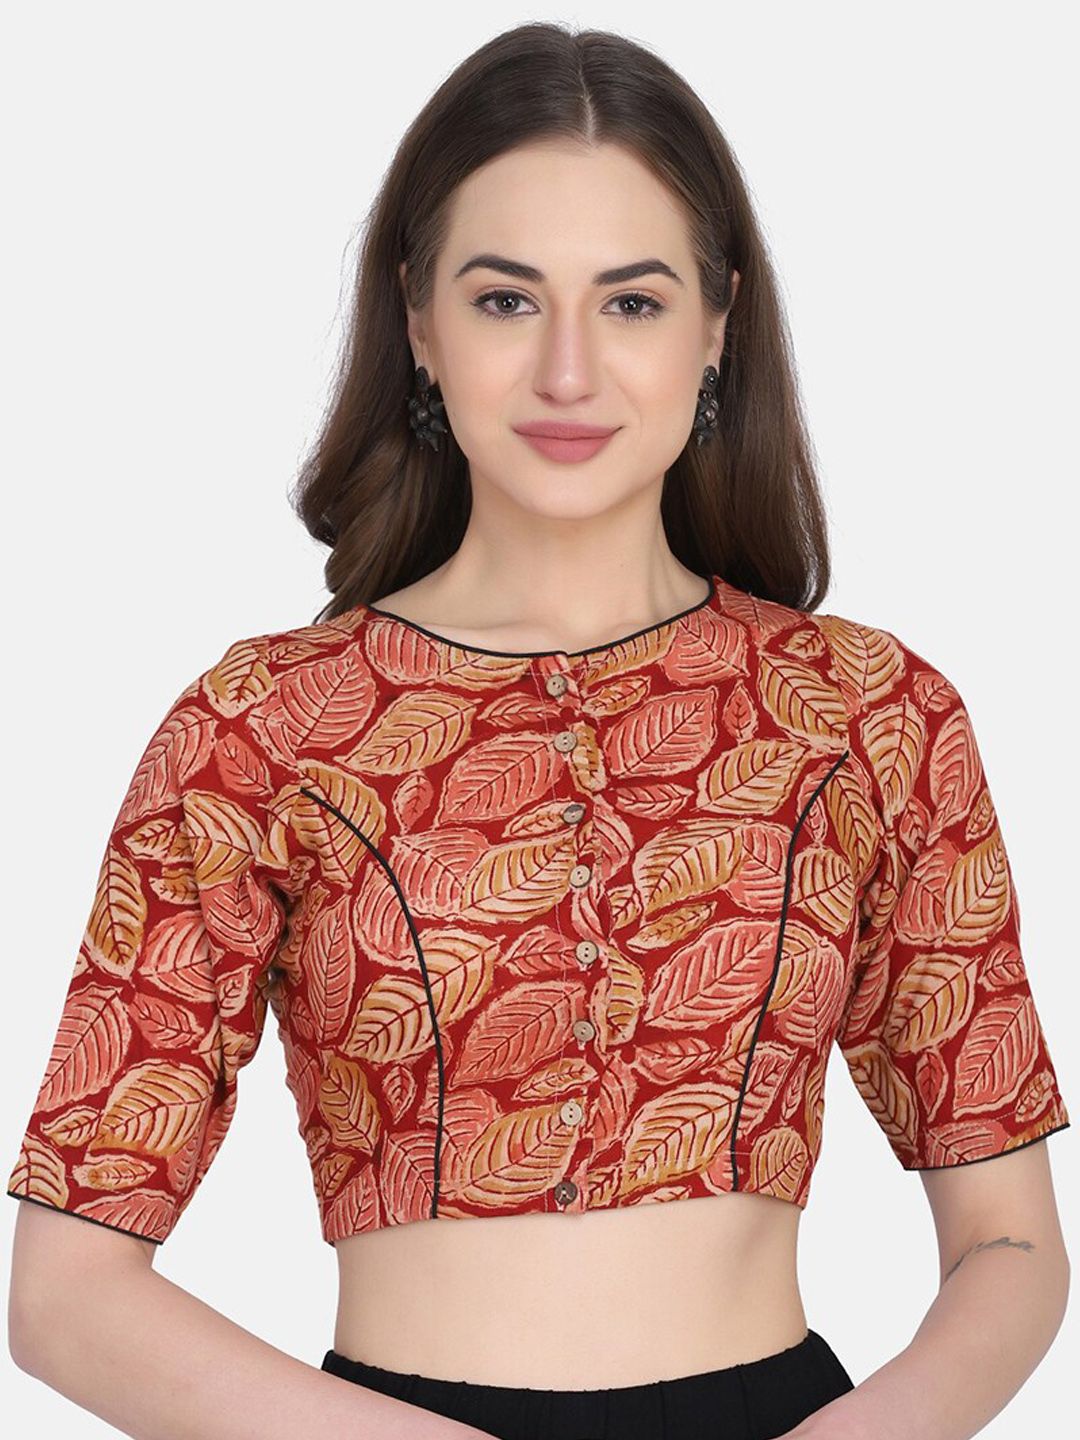 THE WEAVE TRAVELLER Red Kalamkari Printed Cotton Non-Padded Readymade Saree Blouse Price in India